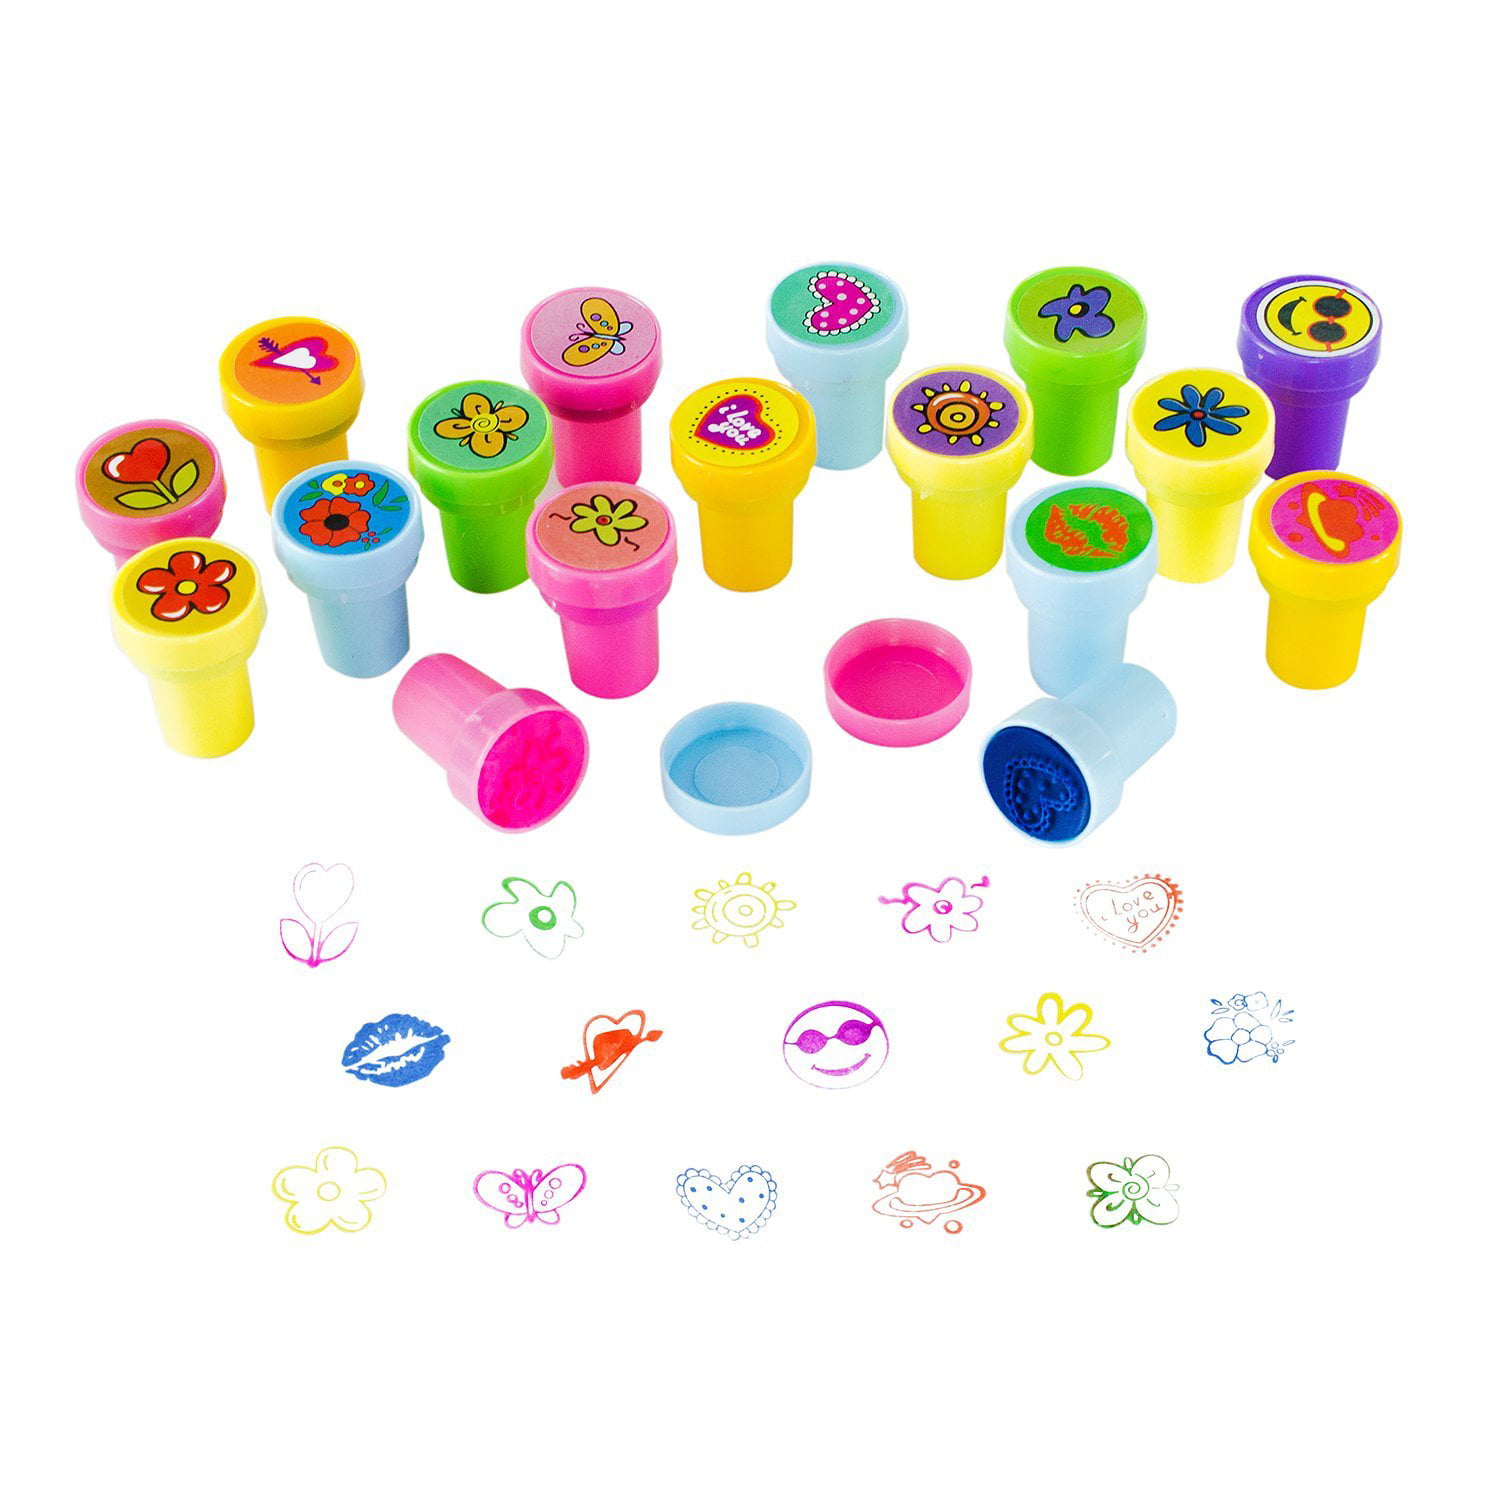 Assorted Mini Colorful Rubber Hearts, Smiley Faces, Flower Design Stamps for Children Party Favor Gifts (50 Pack) by Super Z Outlet